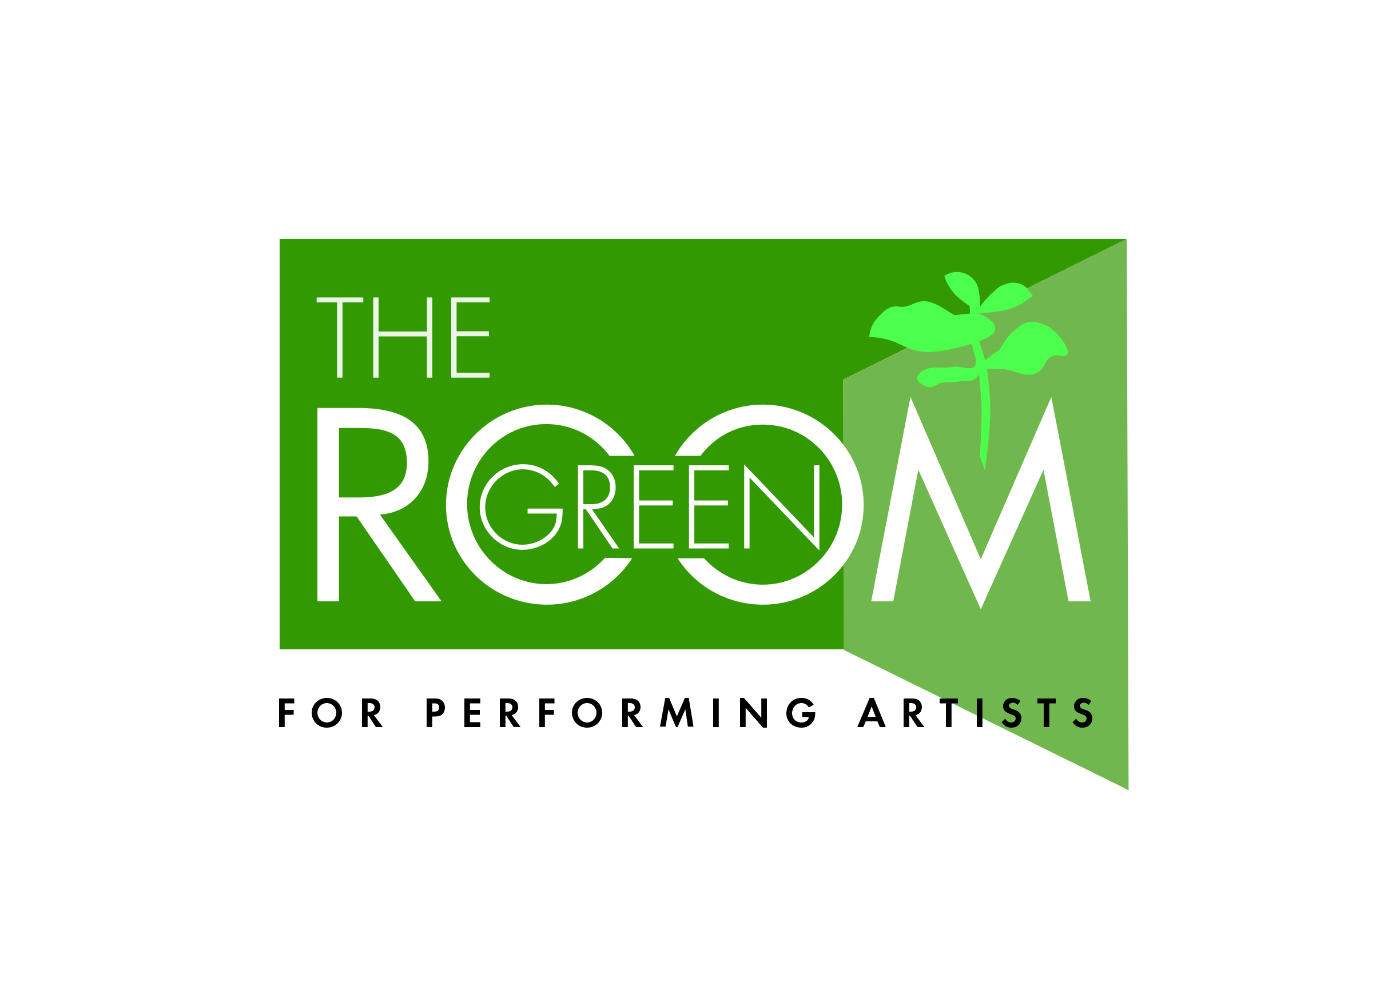 TGR The Green Room logo - name within a green walled space, with a plant growing out of the letter M.